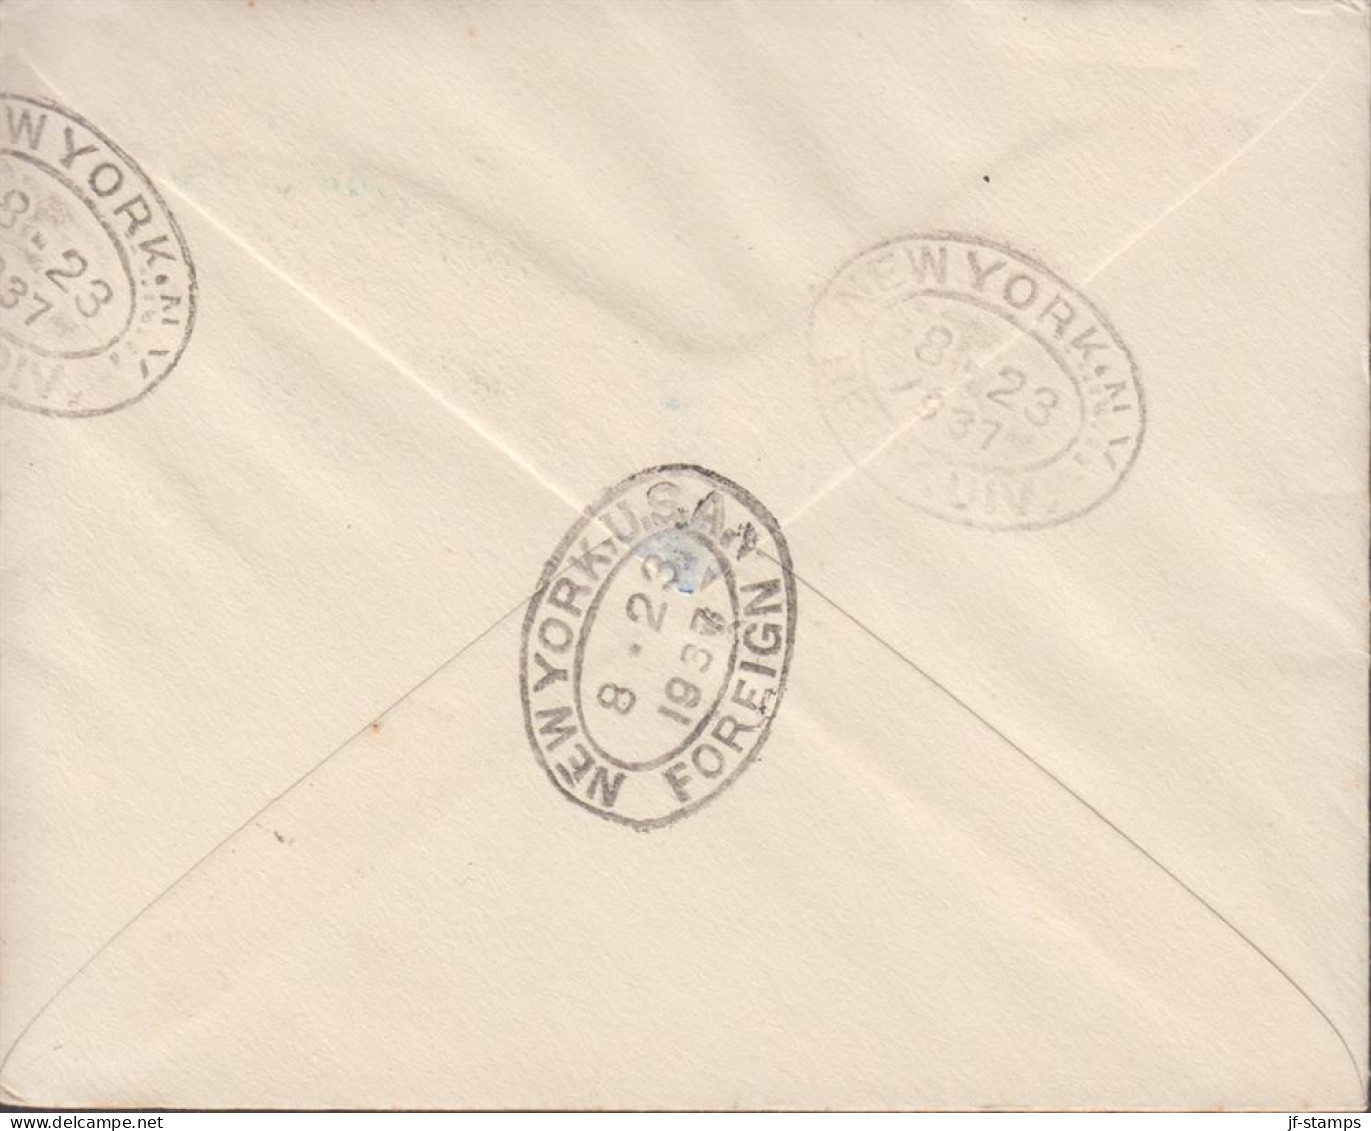 1937. TURKS & CAICOS ISLANDS. Georg VI Coronation Complete Set On Small Cover To London. (Michel  115-117) - JF432576 - Turks And Caicos